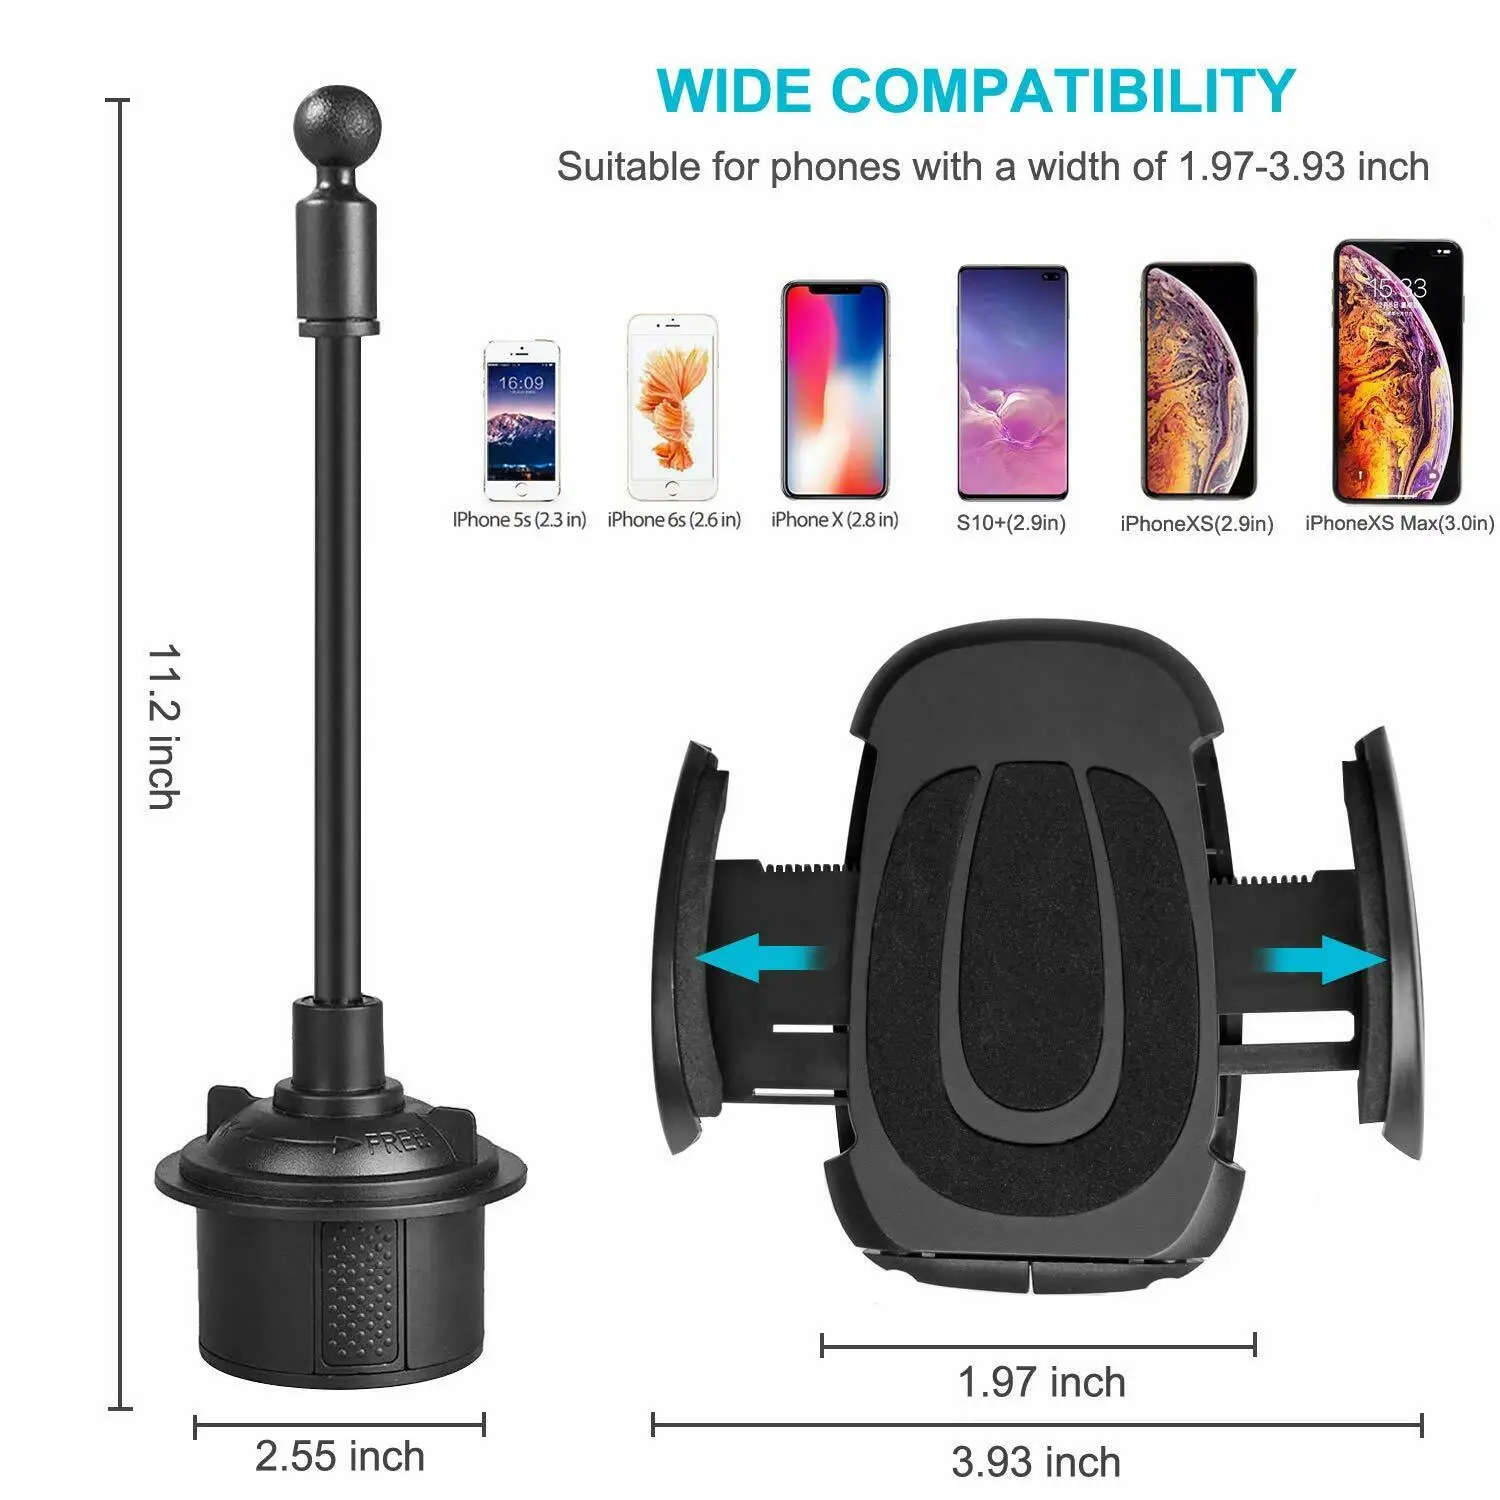 car cup holder phone mount universal adjustable gooseneck cup holder cradle car mount for iphone samsung xiaomi smartphone stand free global shipping